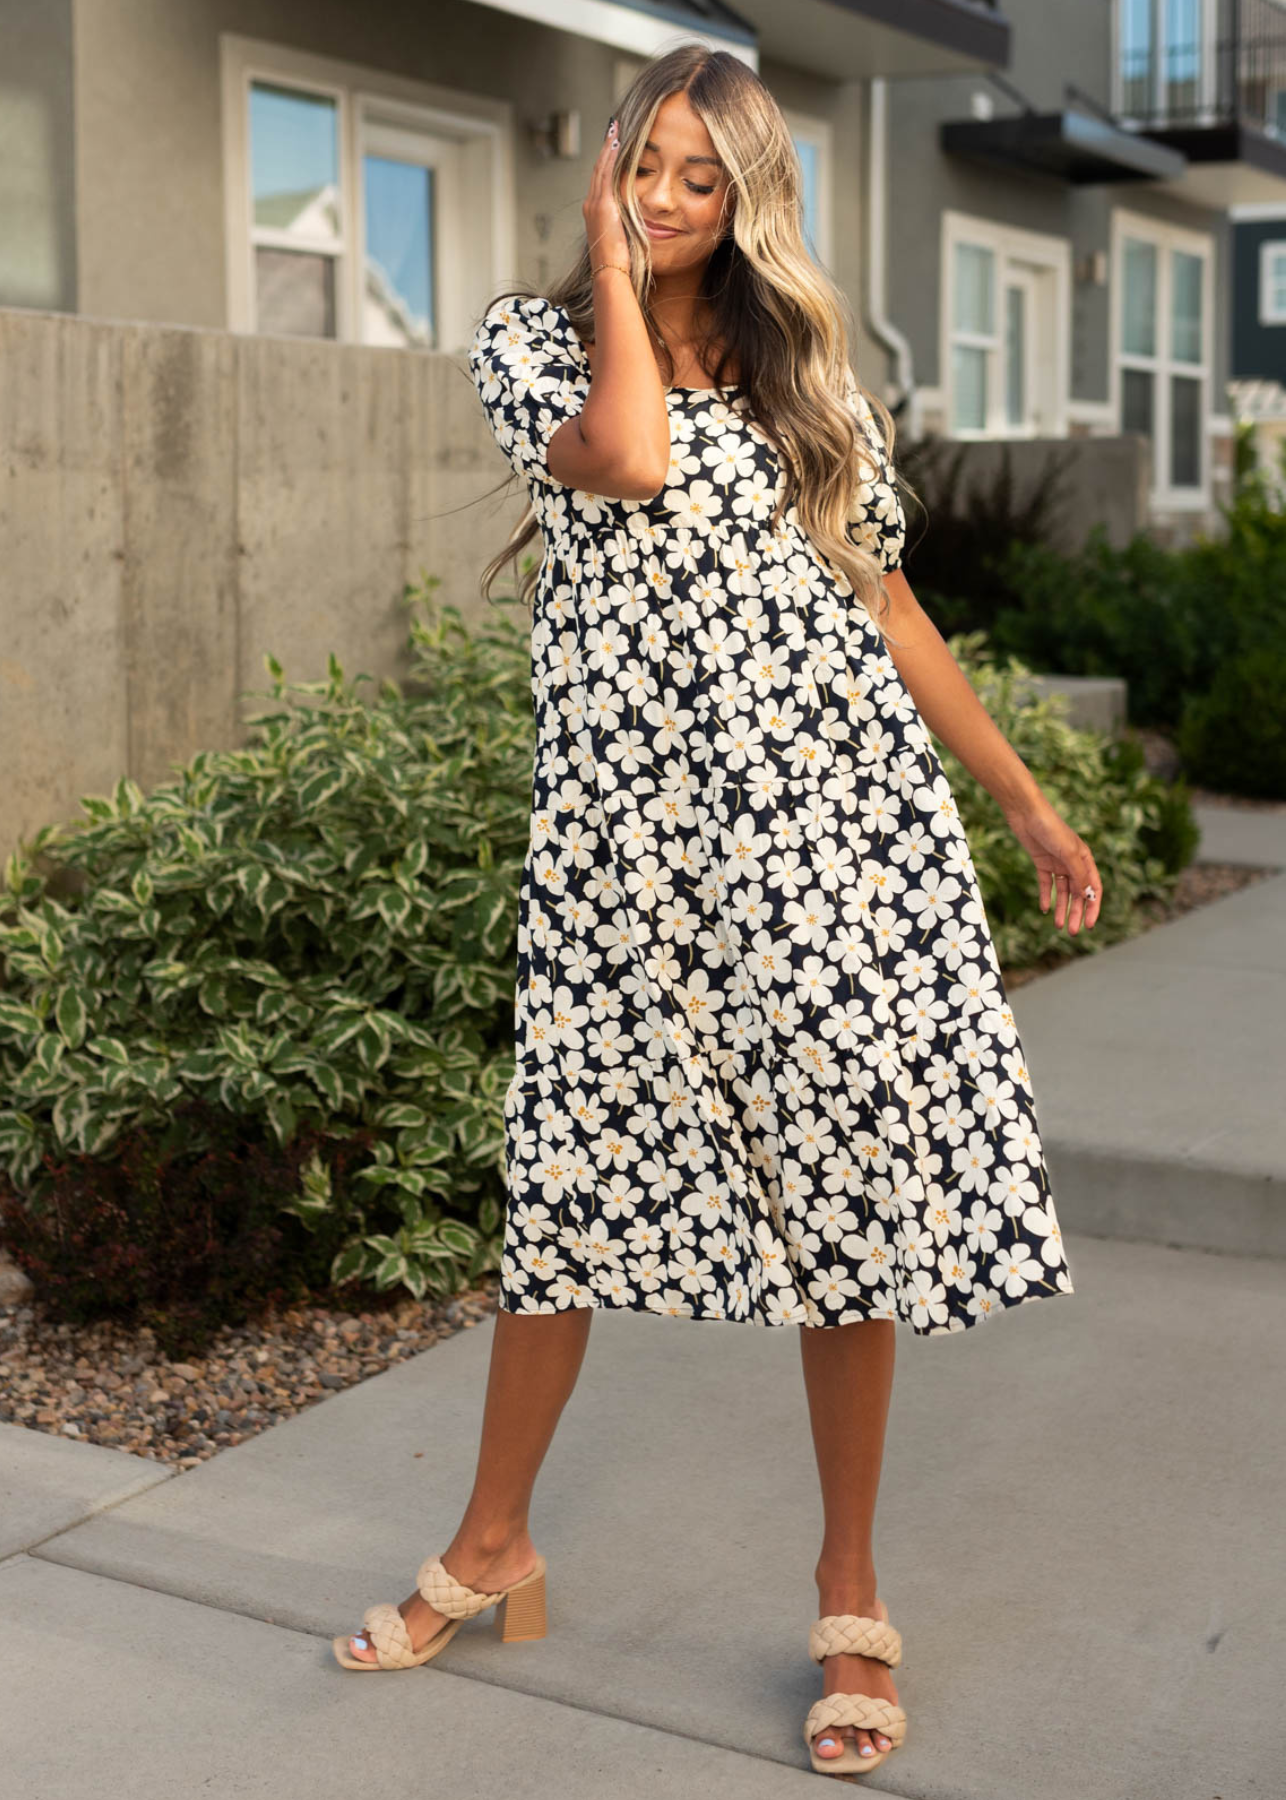 Short sleeve ivory dress with floral print